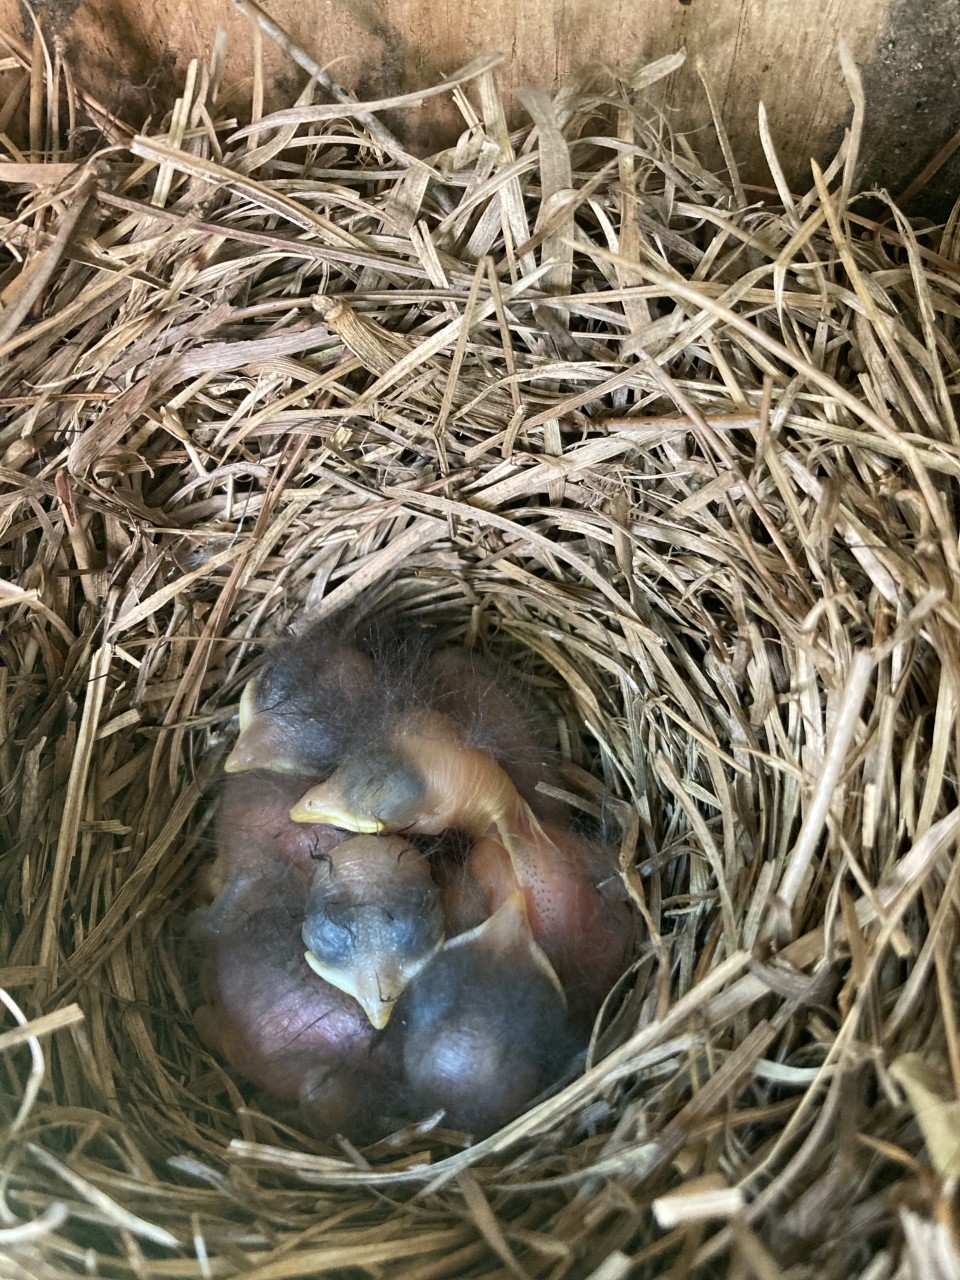 Eastern bluebird hatchlings in a nest box at The Grove Museum.